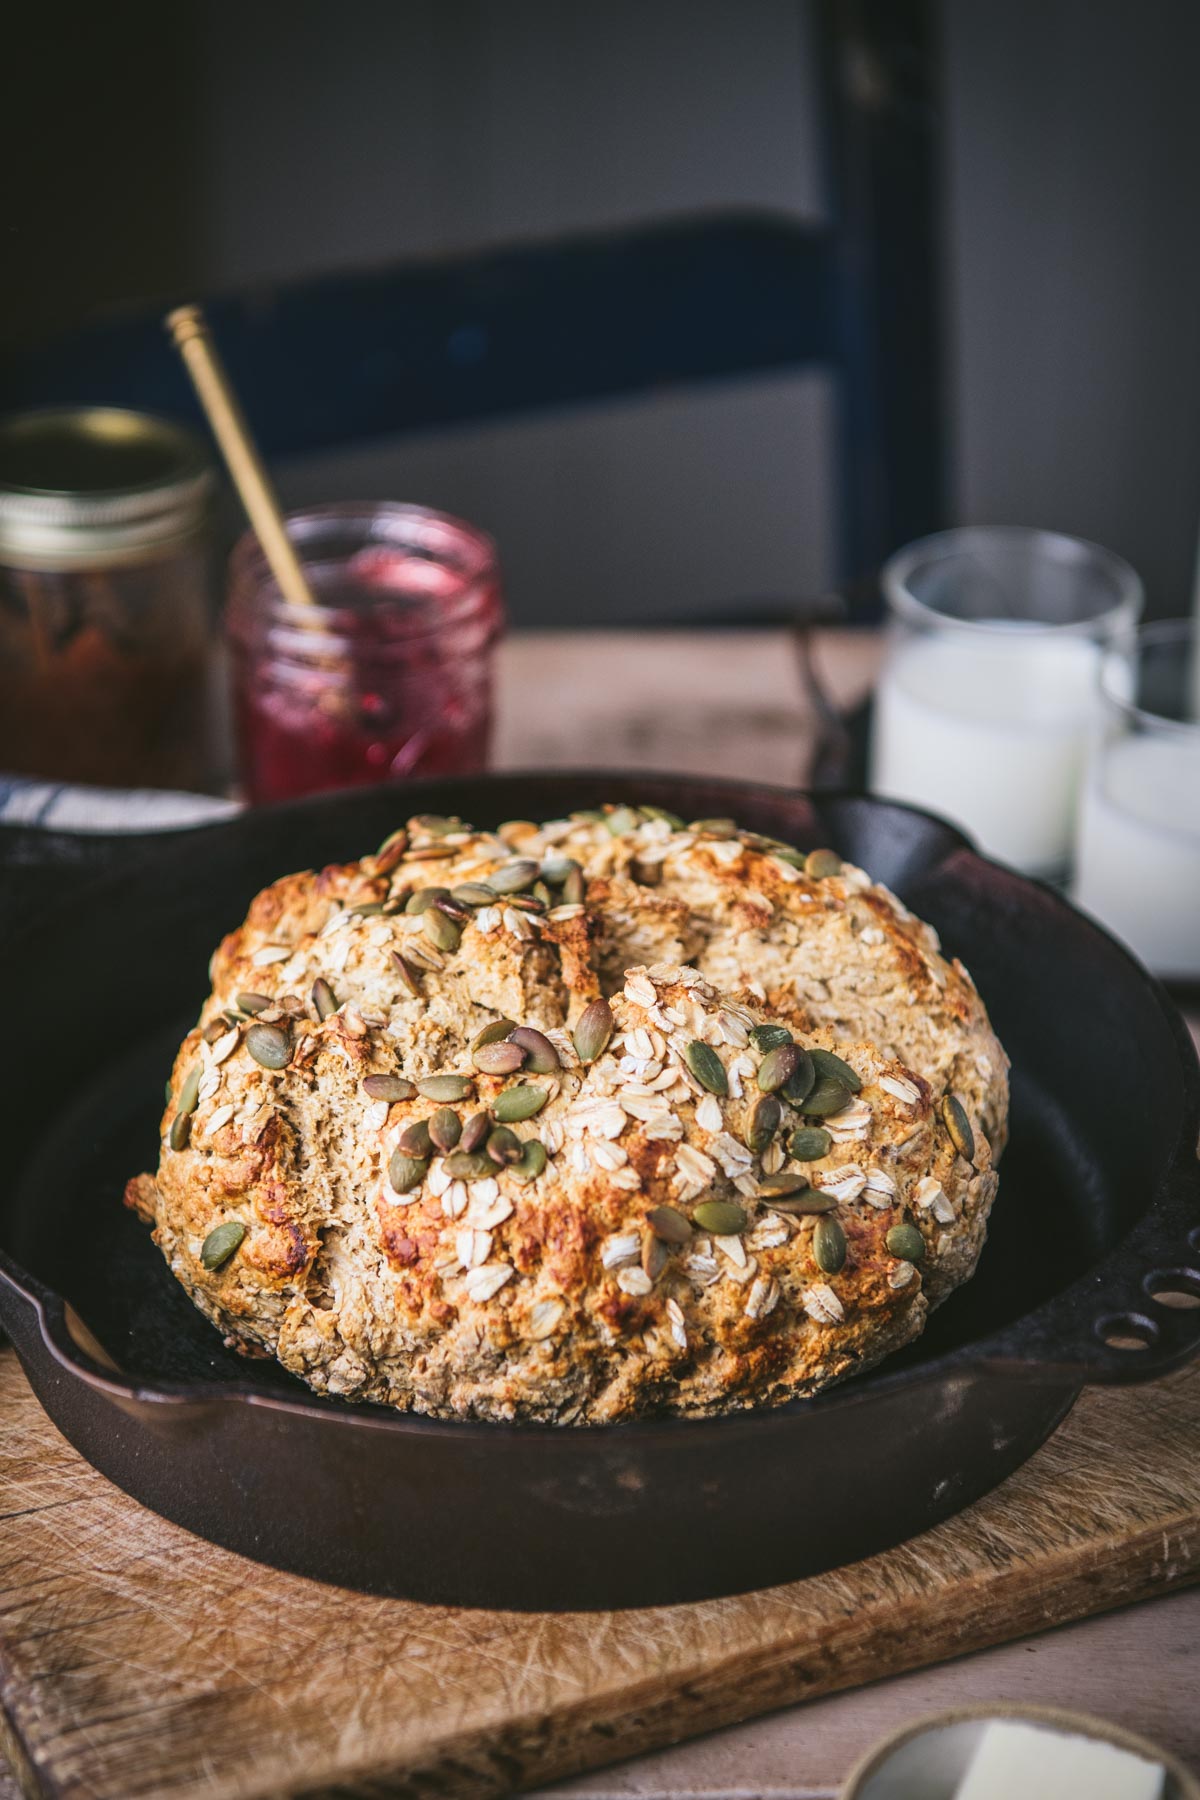 Baked loaf of soda bread in a cast iron skillet on a wooden table.